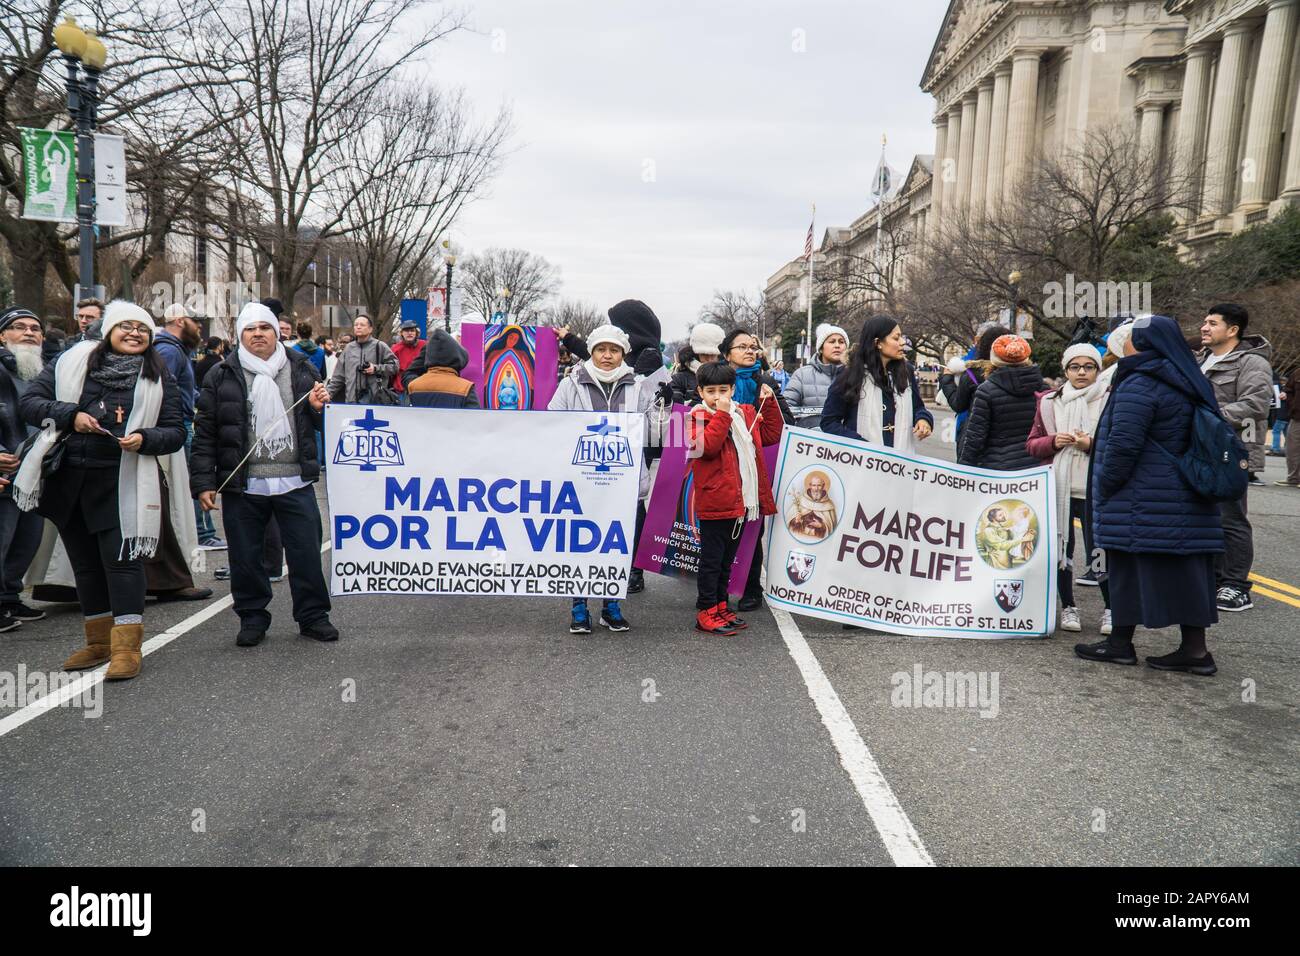 March For Life in Washington D.C. Stock Photo